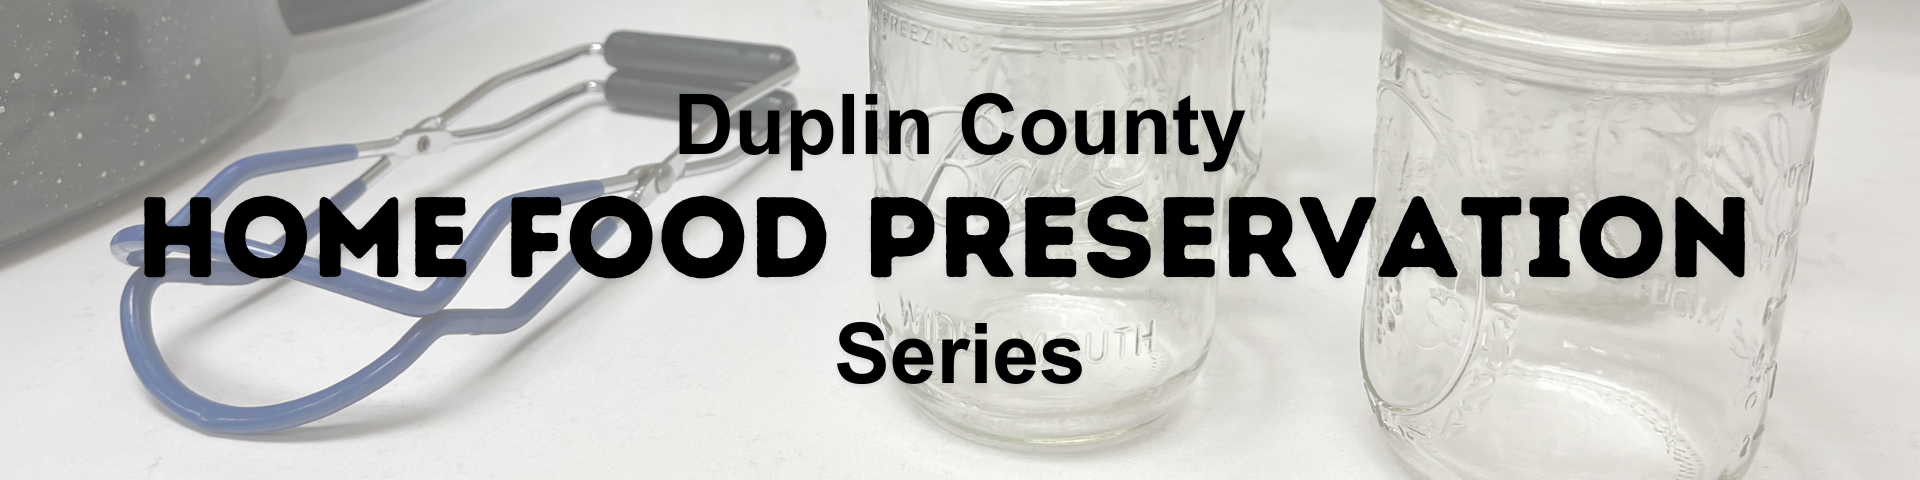 Duplin county home food preservation series